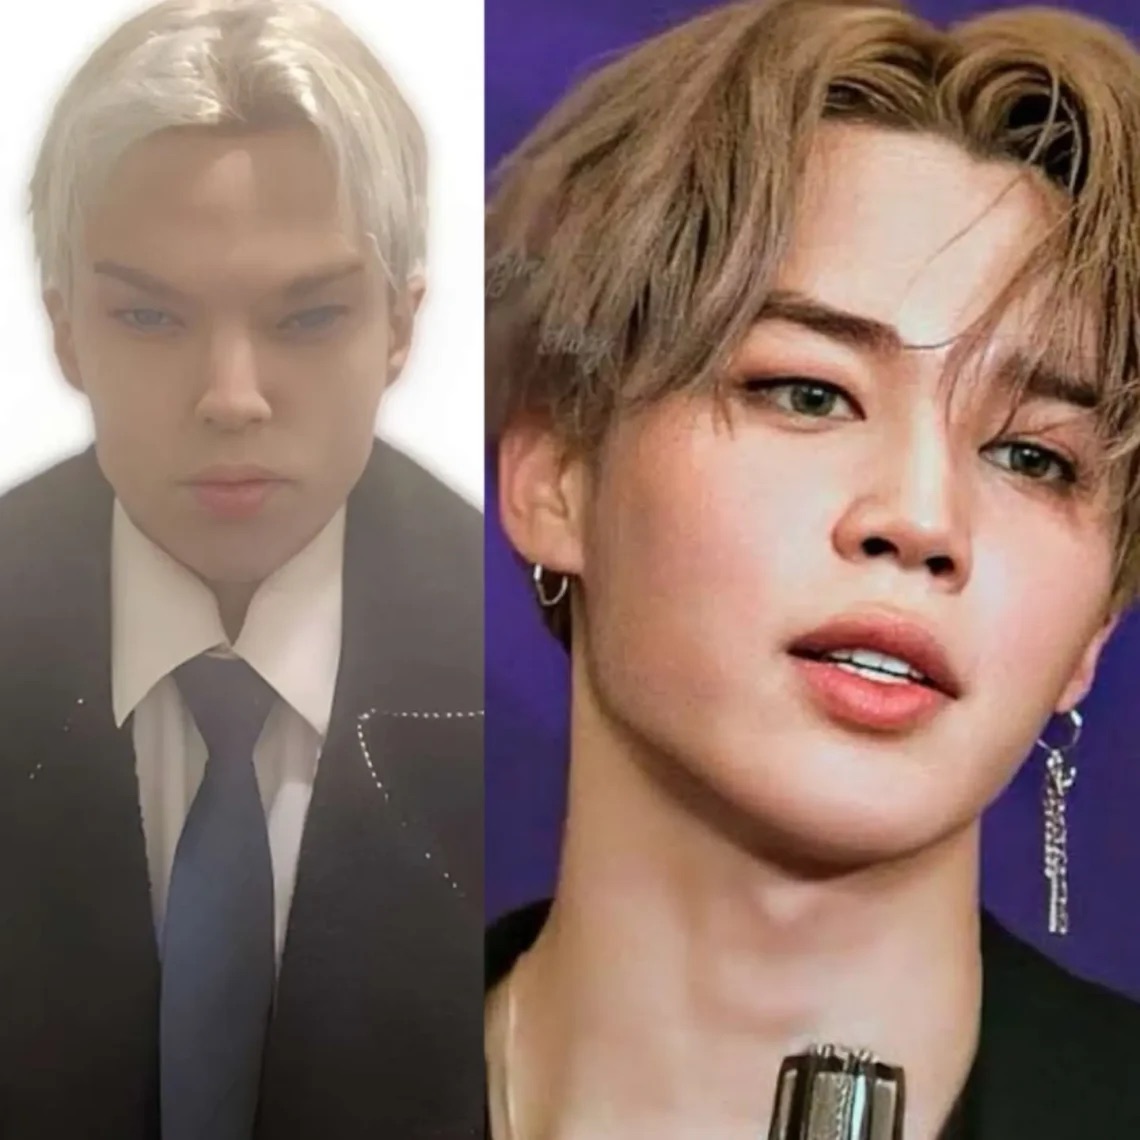 Saint Von Colucci, a 22-year-old Canadian, dies after undergoing 12 surgeries to look like BTS' Jimin.